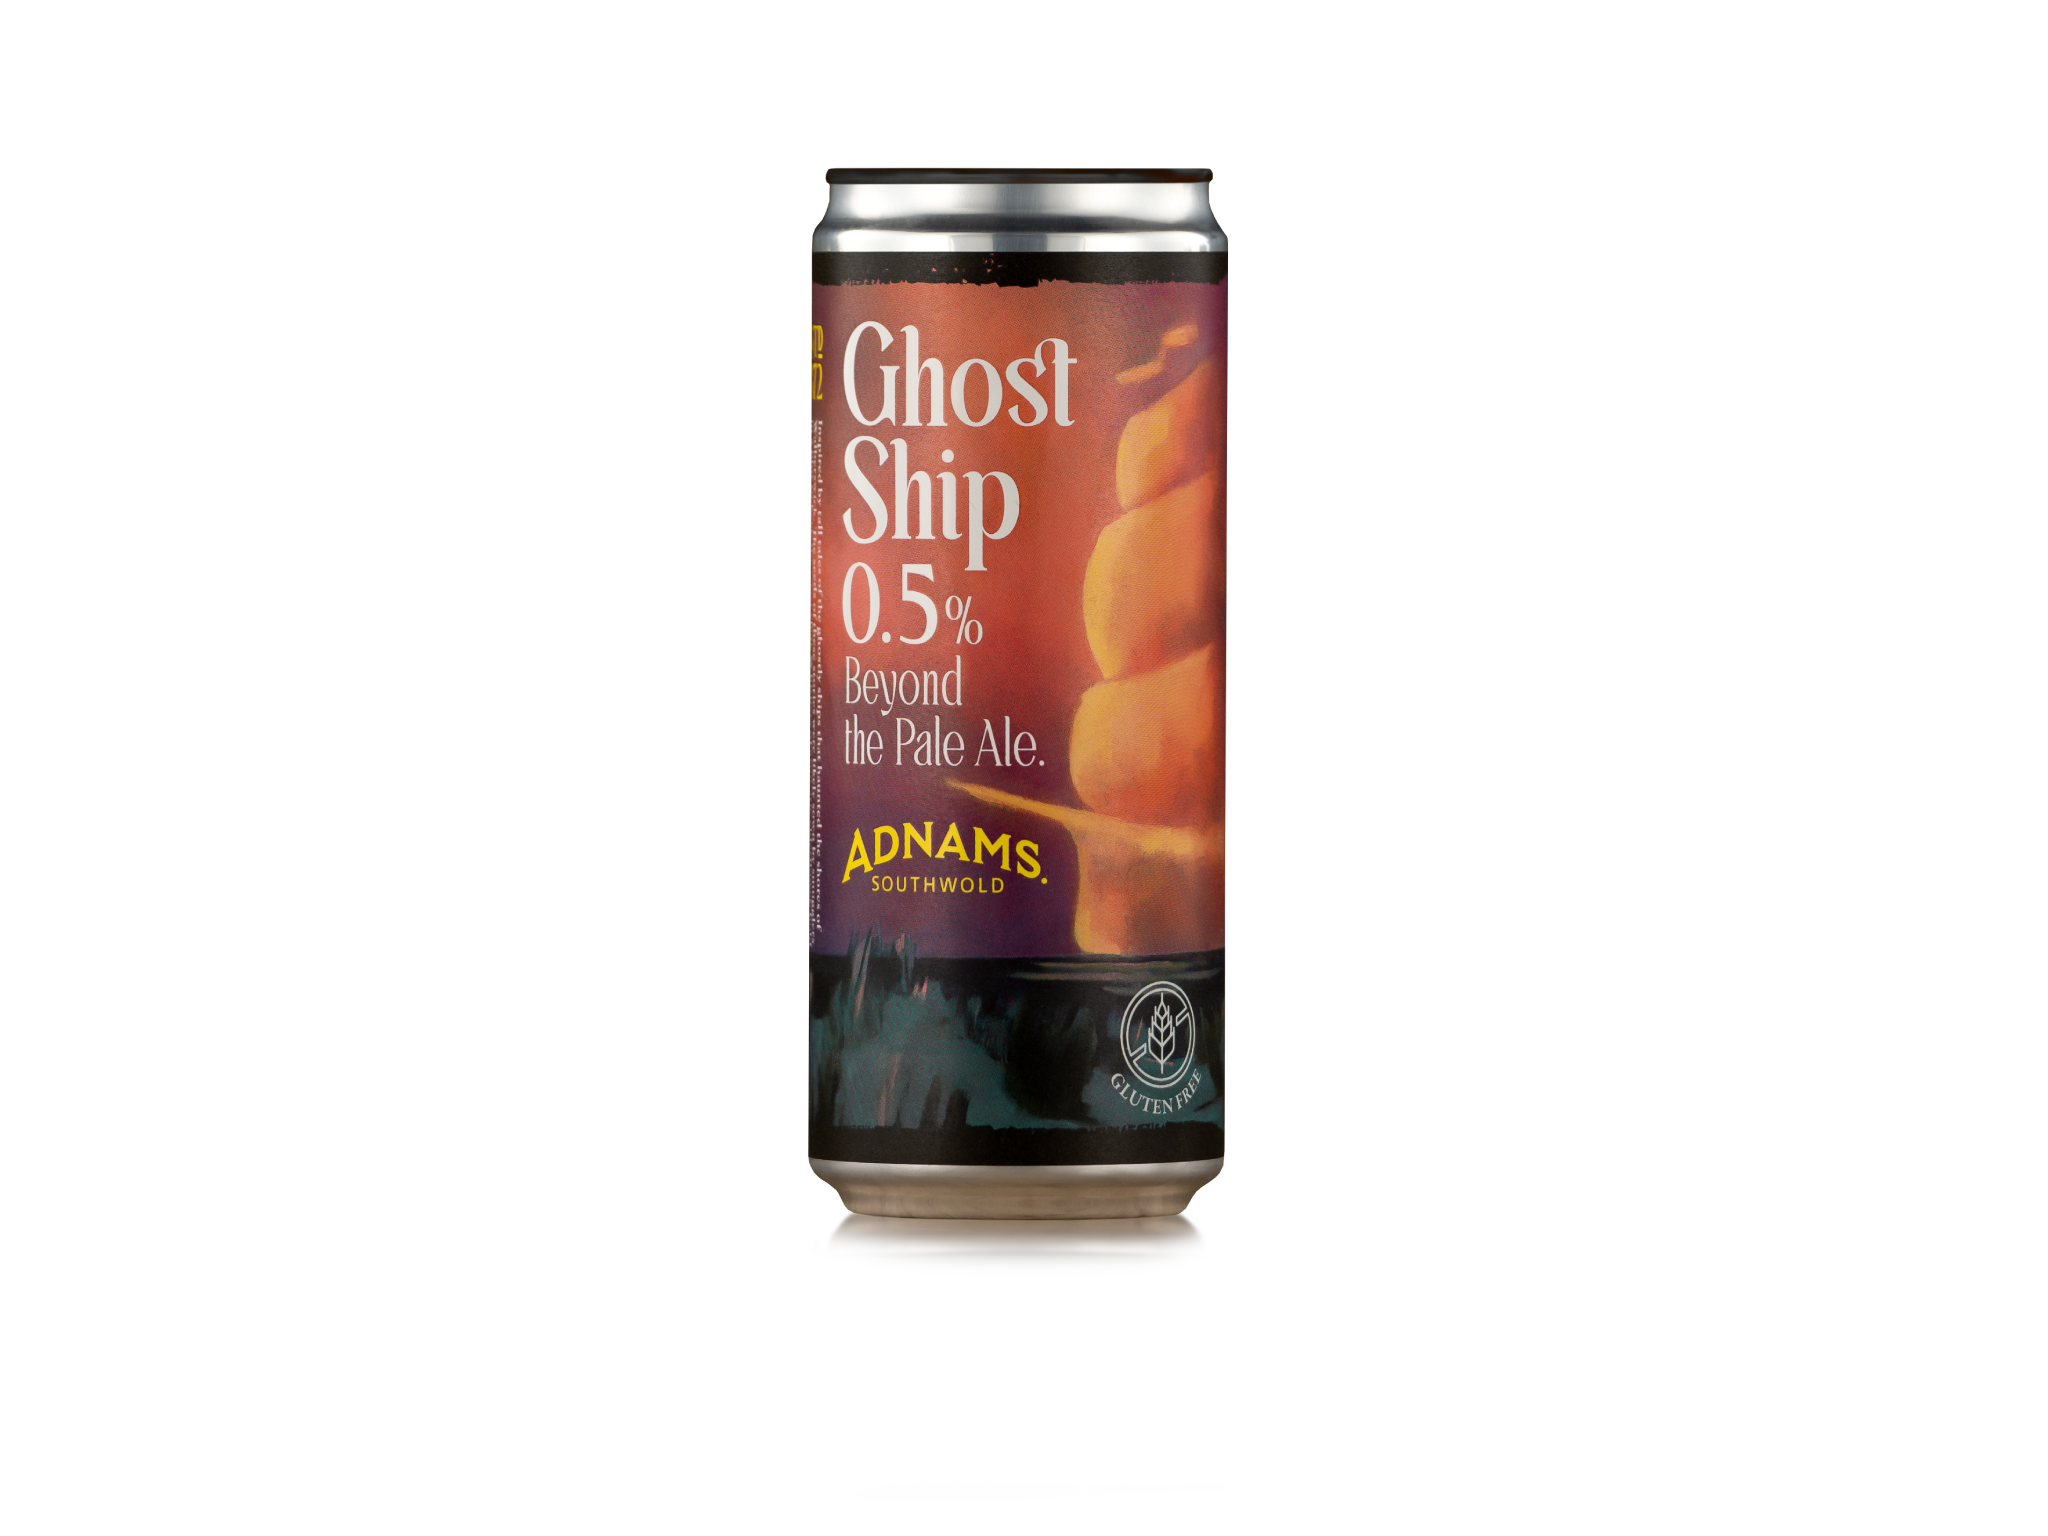 Adnams Ghost Ship-indybest